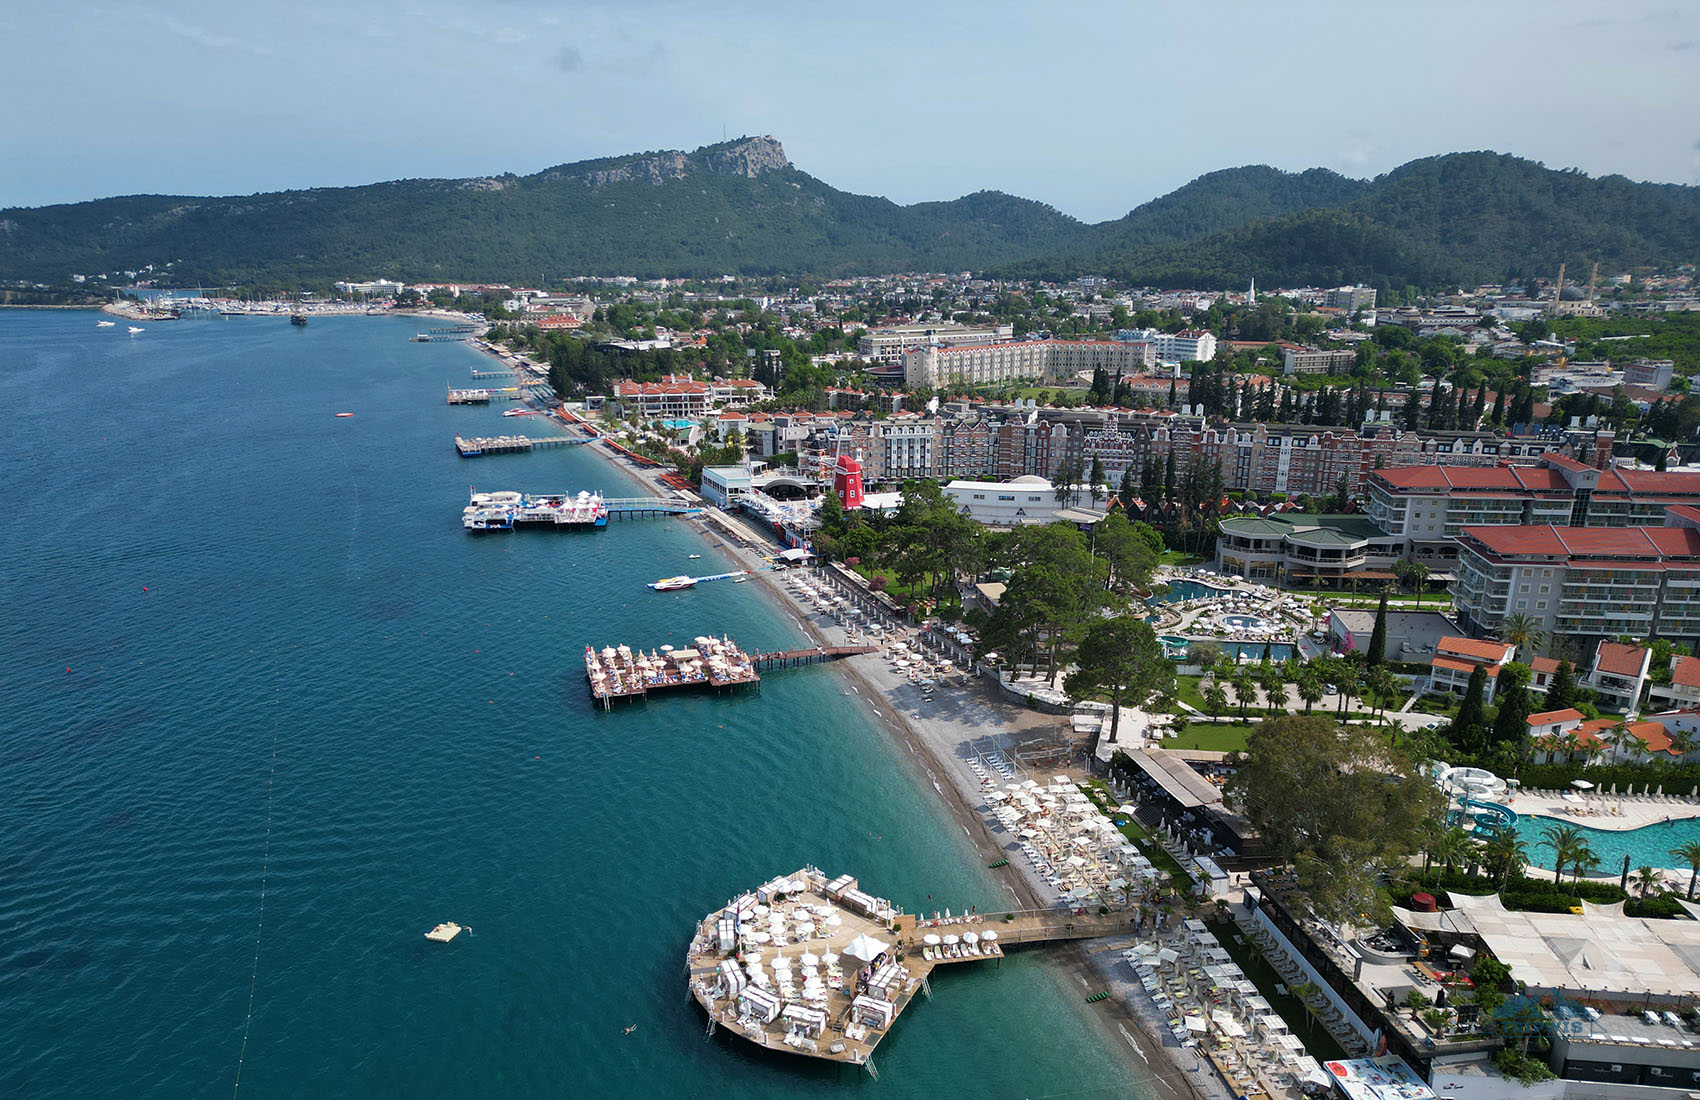 Kemer from the drone